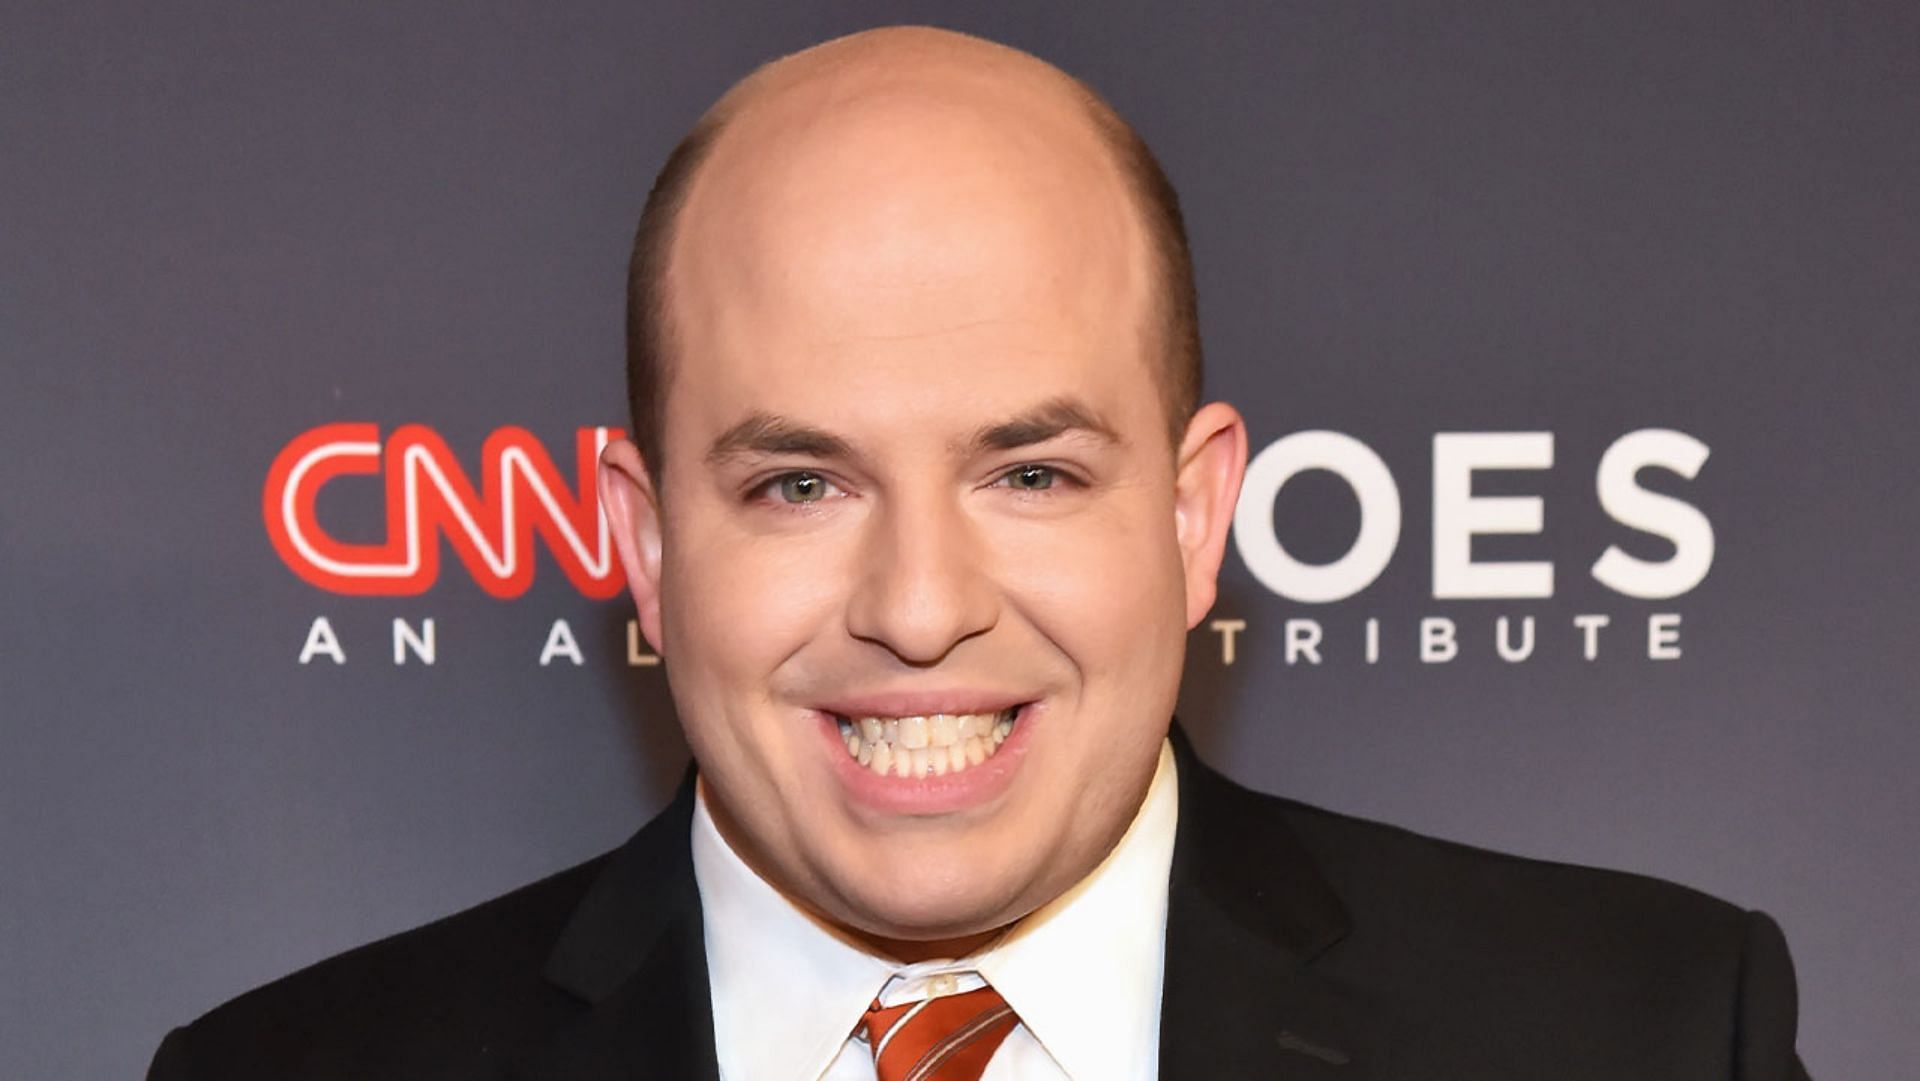 Brian Stelter started working at CNN in 2014. (Image via Kevin Mazur/Getty Images)